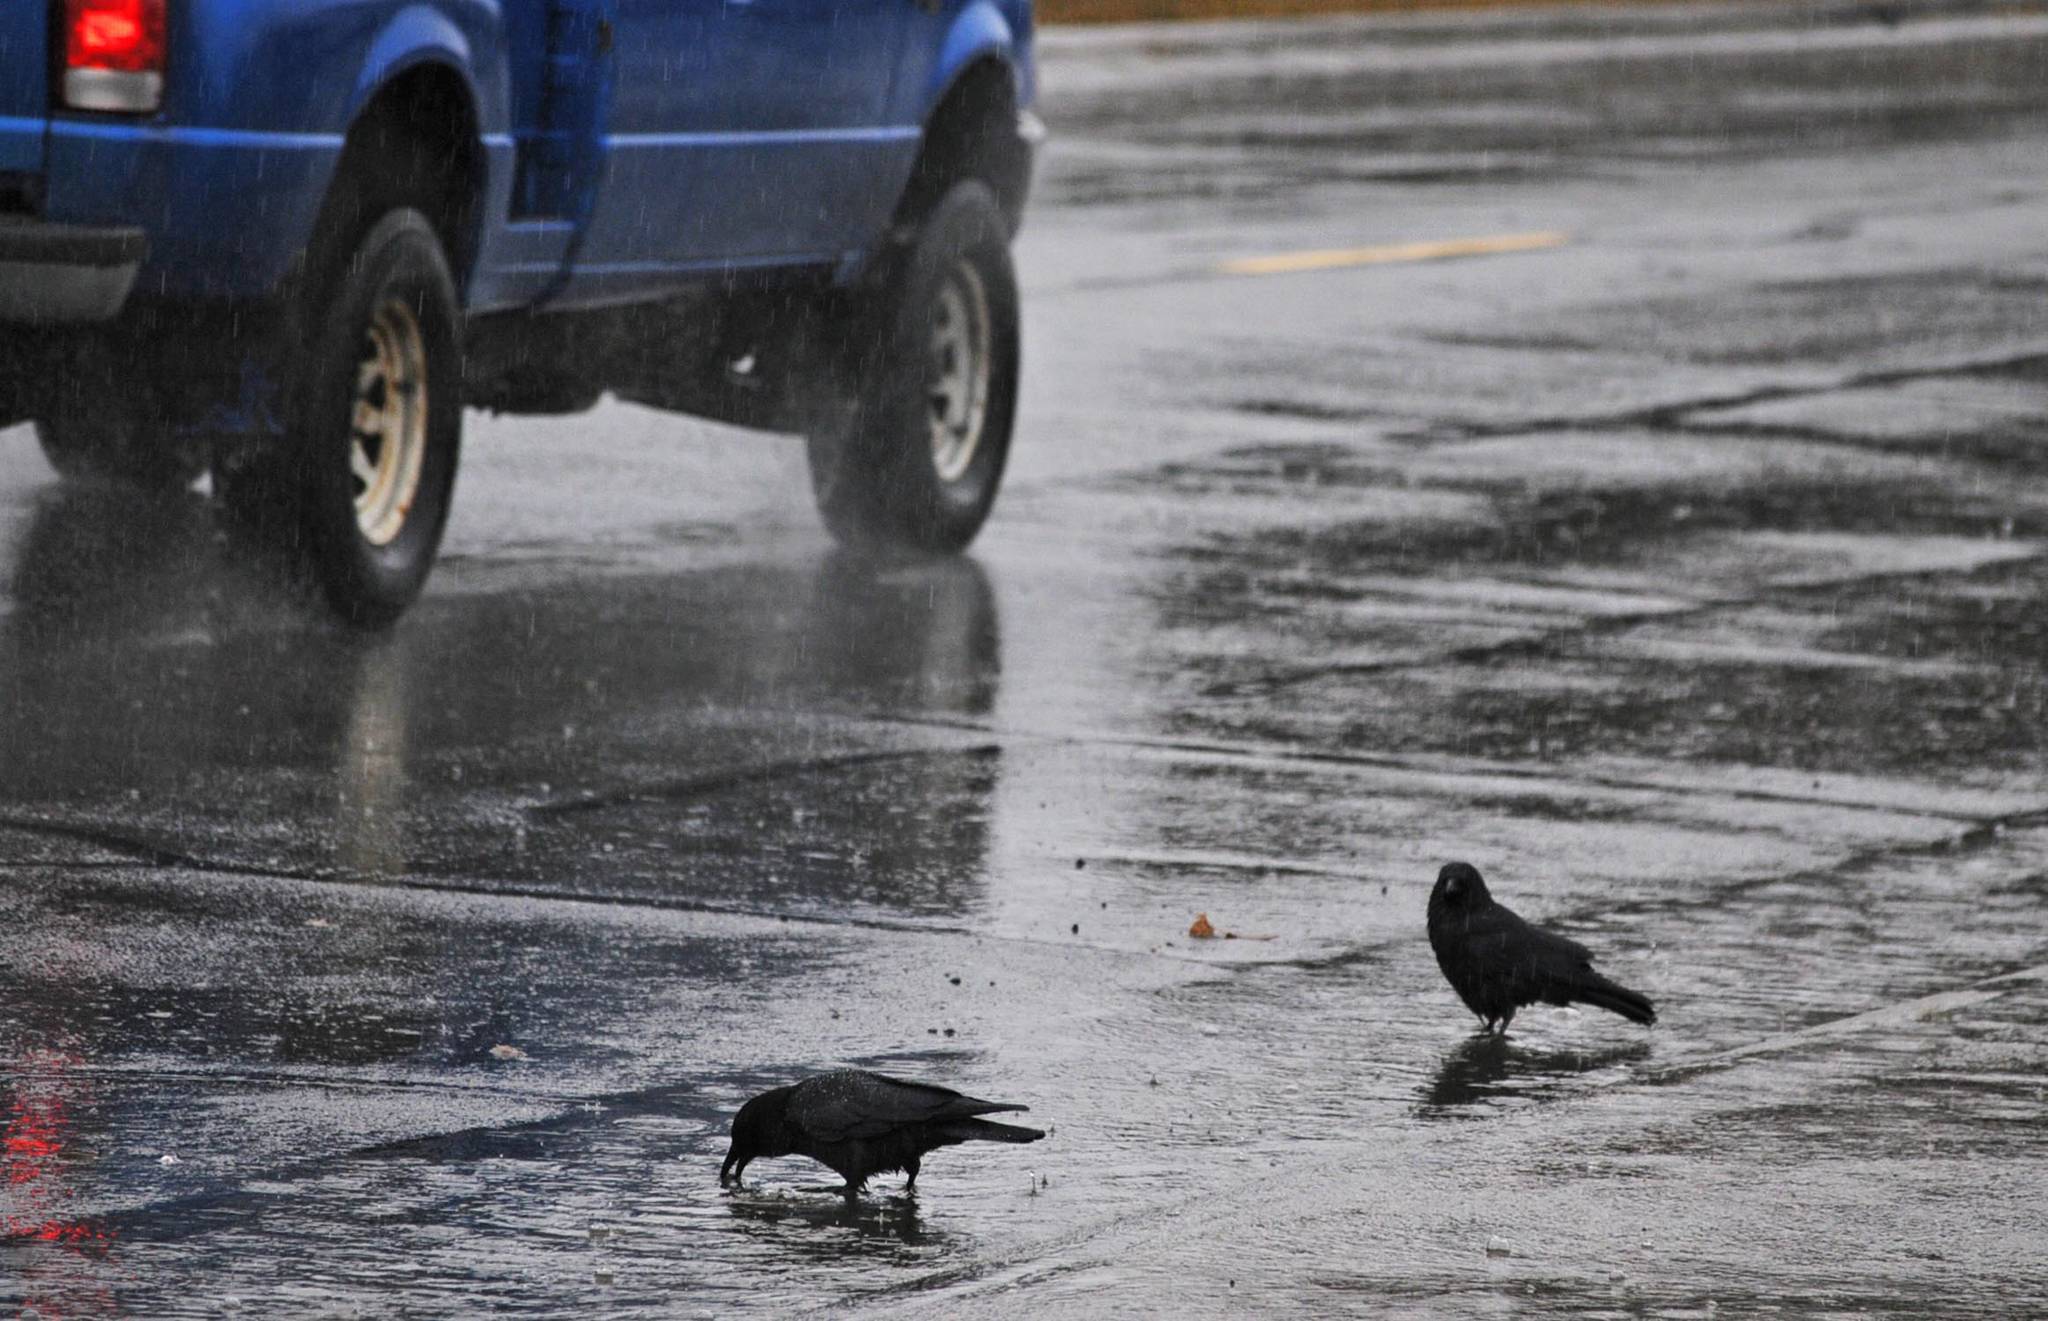 Bird bath Crows bathe in rainwater puddling in the gutter alongside Trading Bay Road on Wednesday in Kenai. Tuesday morning brought a little wet snow accumulation to the central Kenai Peninsula, but by midafternoon, temperatures had warmed and taken the snow with them, turning the precipitation to rain. The rain continued throughout Wednesday with temperatures hanging around 40. The National Weather Service is forecasting the rain to continue through Friday morning with highs staying around the mid- to upper 40s. (Photo by Elizabeth Earl/Peninsula Clarion)